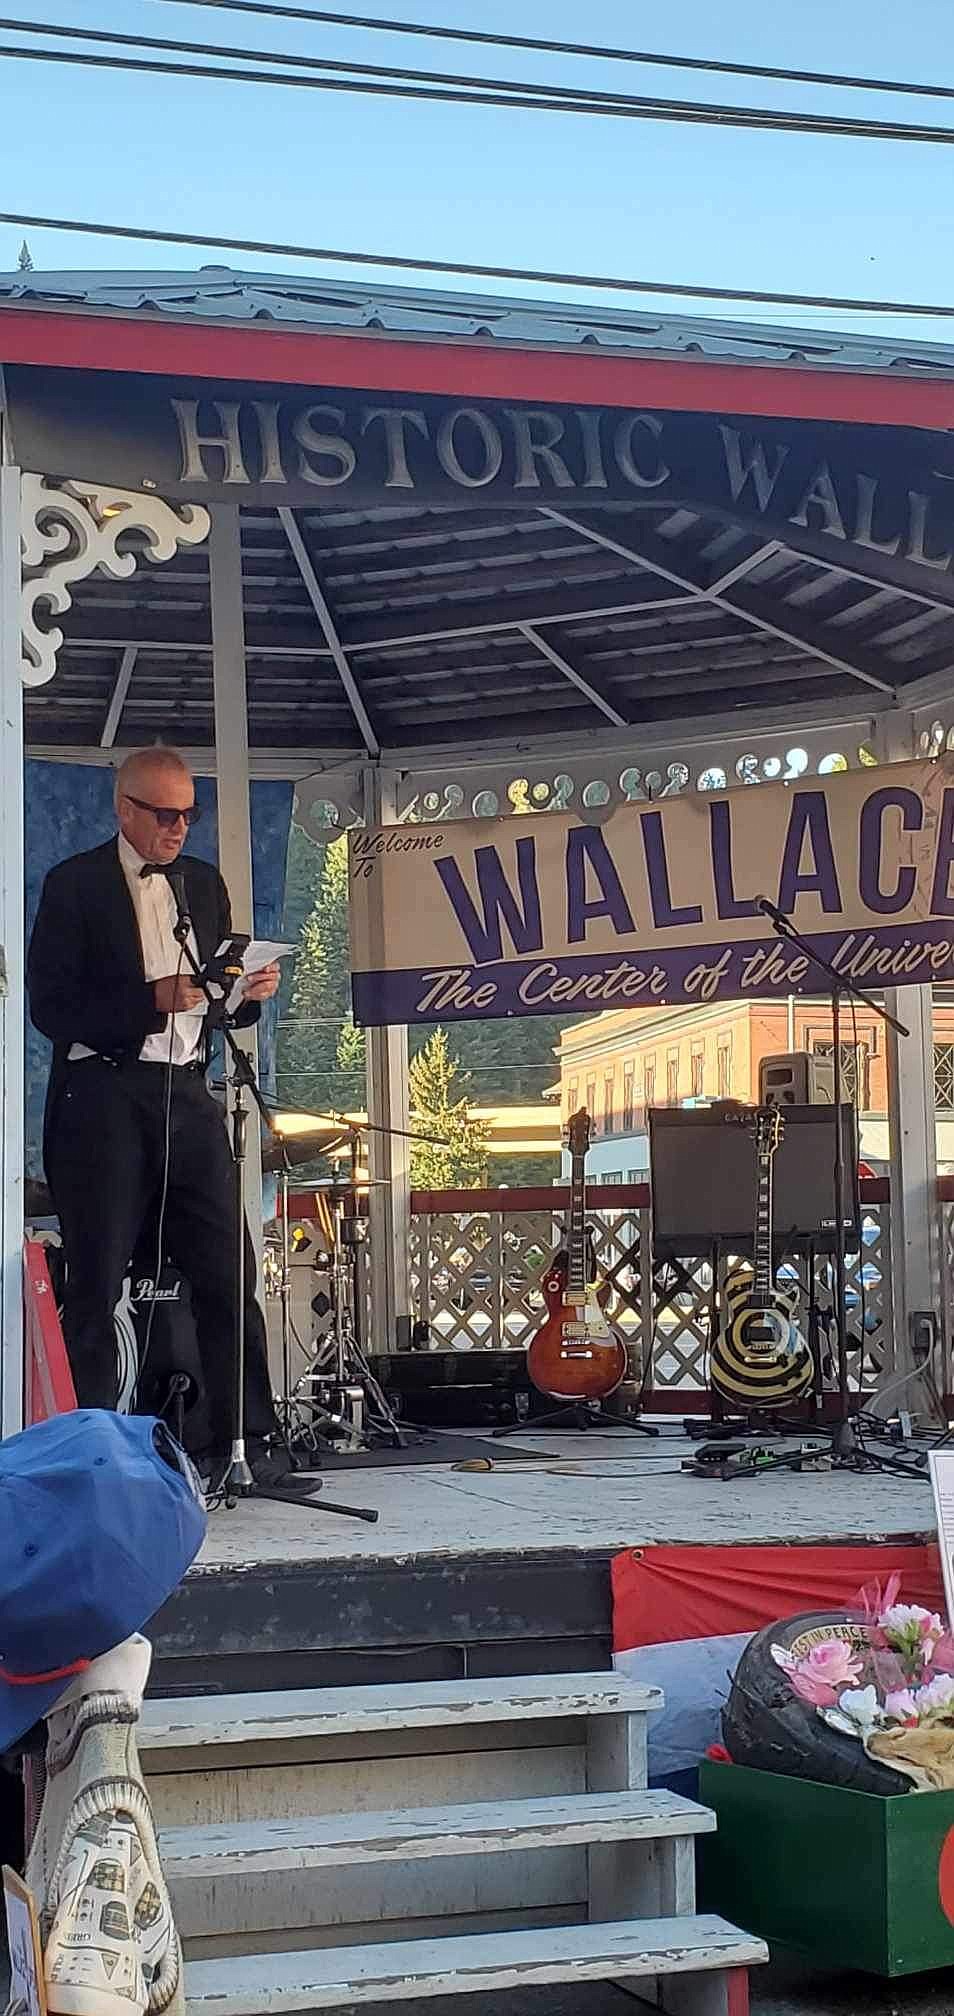 Live music and a putt-putt tournament were all part of the fun Sept. 16 as the city of Wallace celebrated being the "Center of the Universe."